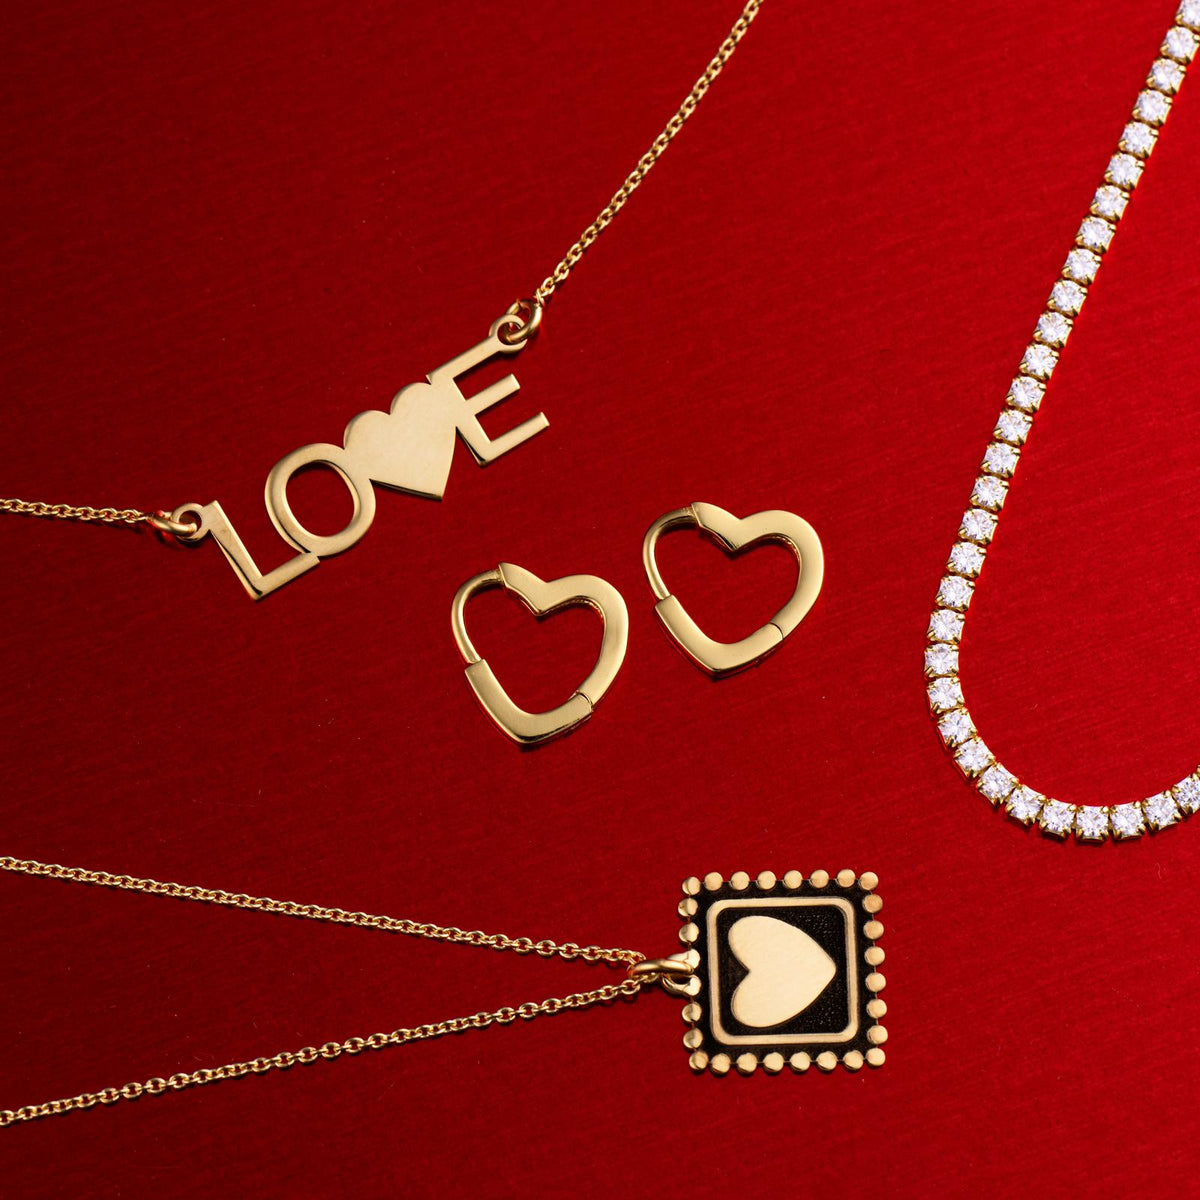 LOVE chain, 18k gold plated silver